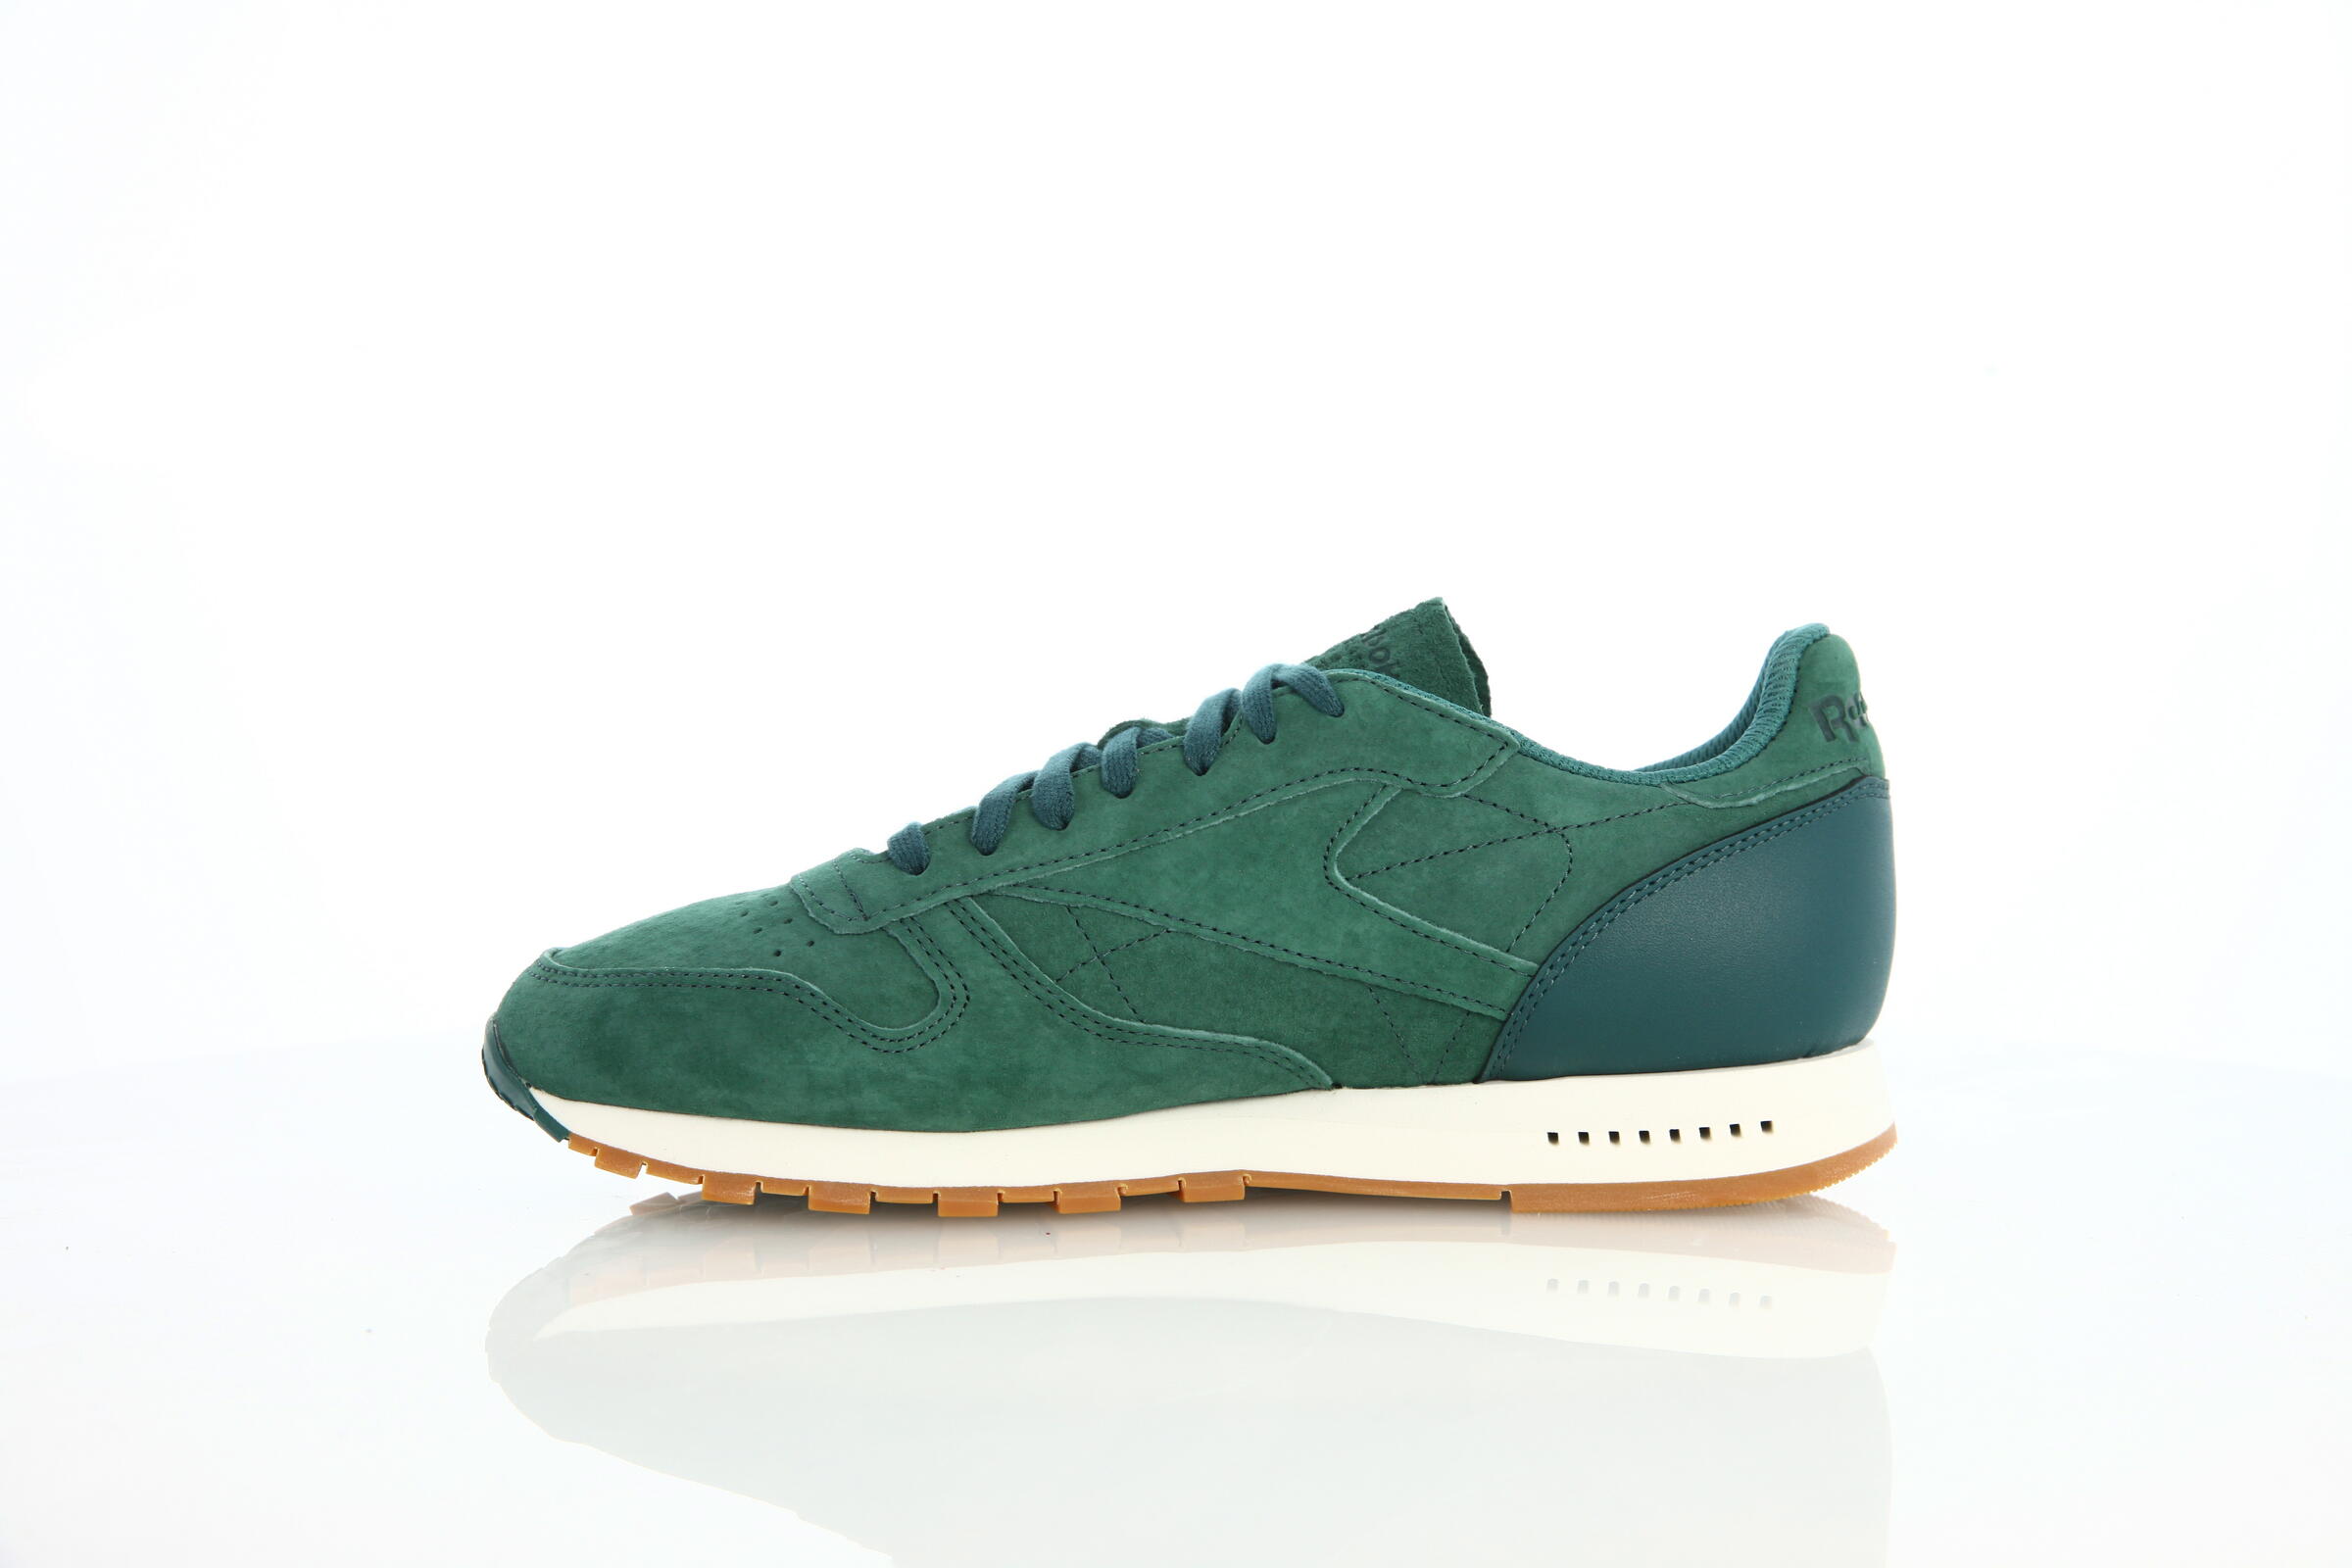 Reebok Classic Leather Sg "Washed Jade"